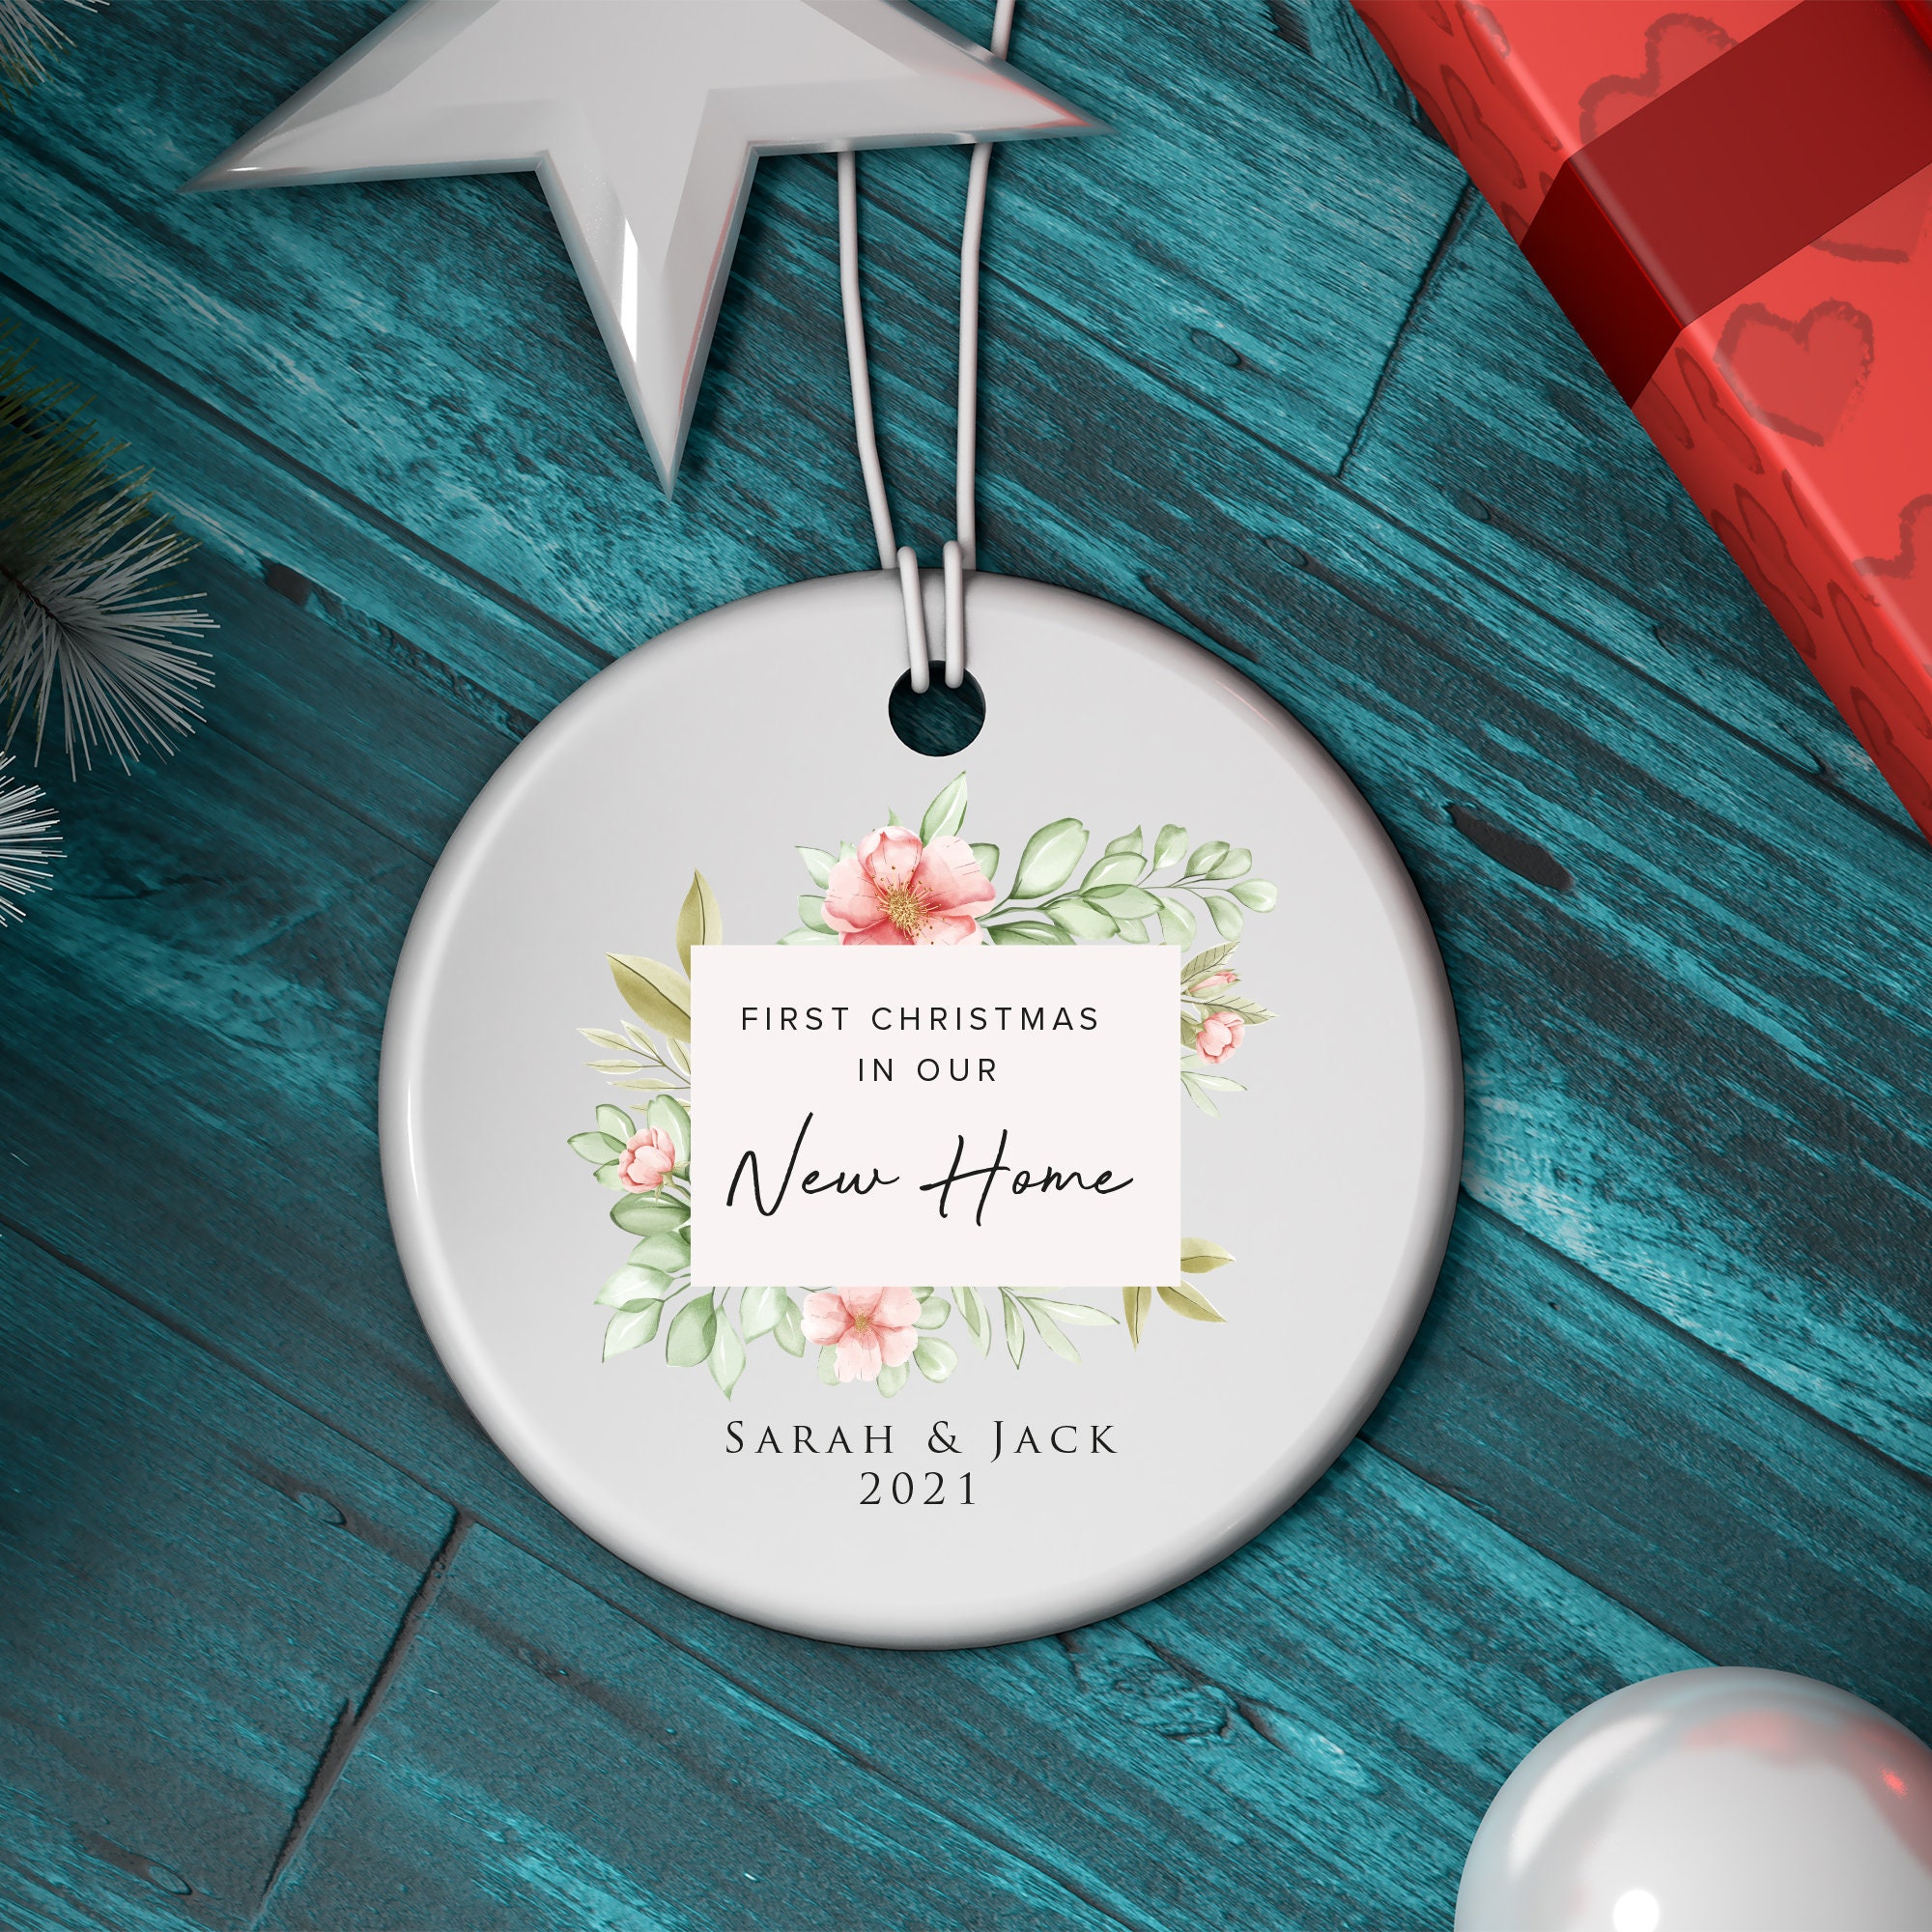 Personalized  Christmas Ornament Our First Christmas as a Family Home Sweet Home 2021 First Christmas in our new home